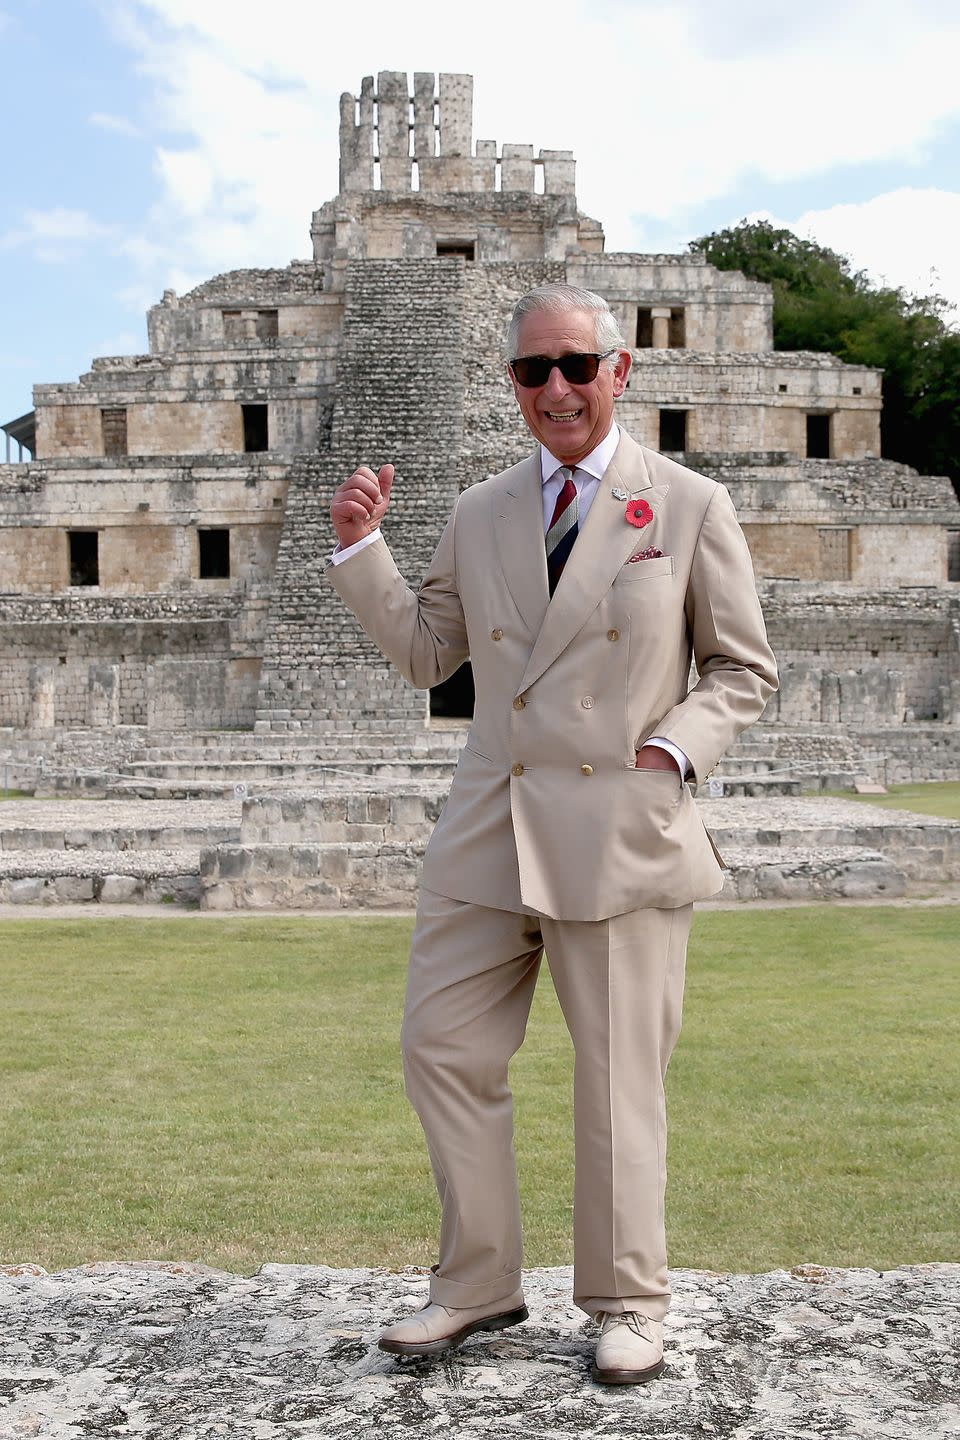 <p>Posing in front of the Edzná archeological site in Campeche, Mexico. </p>